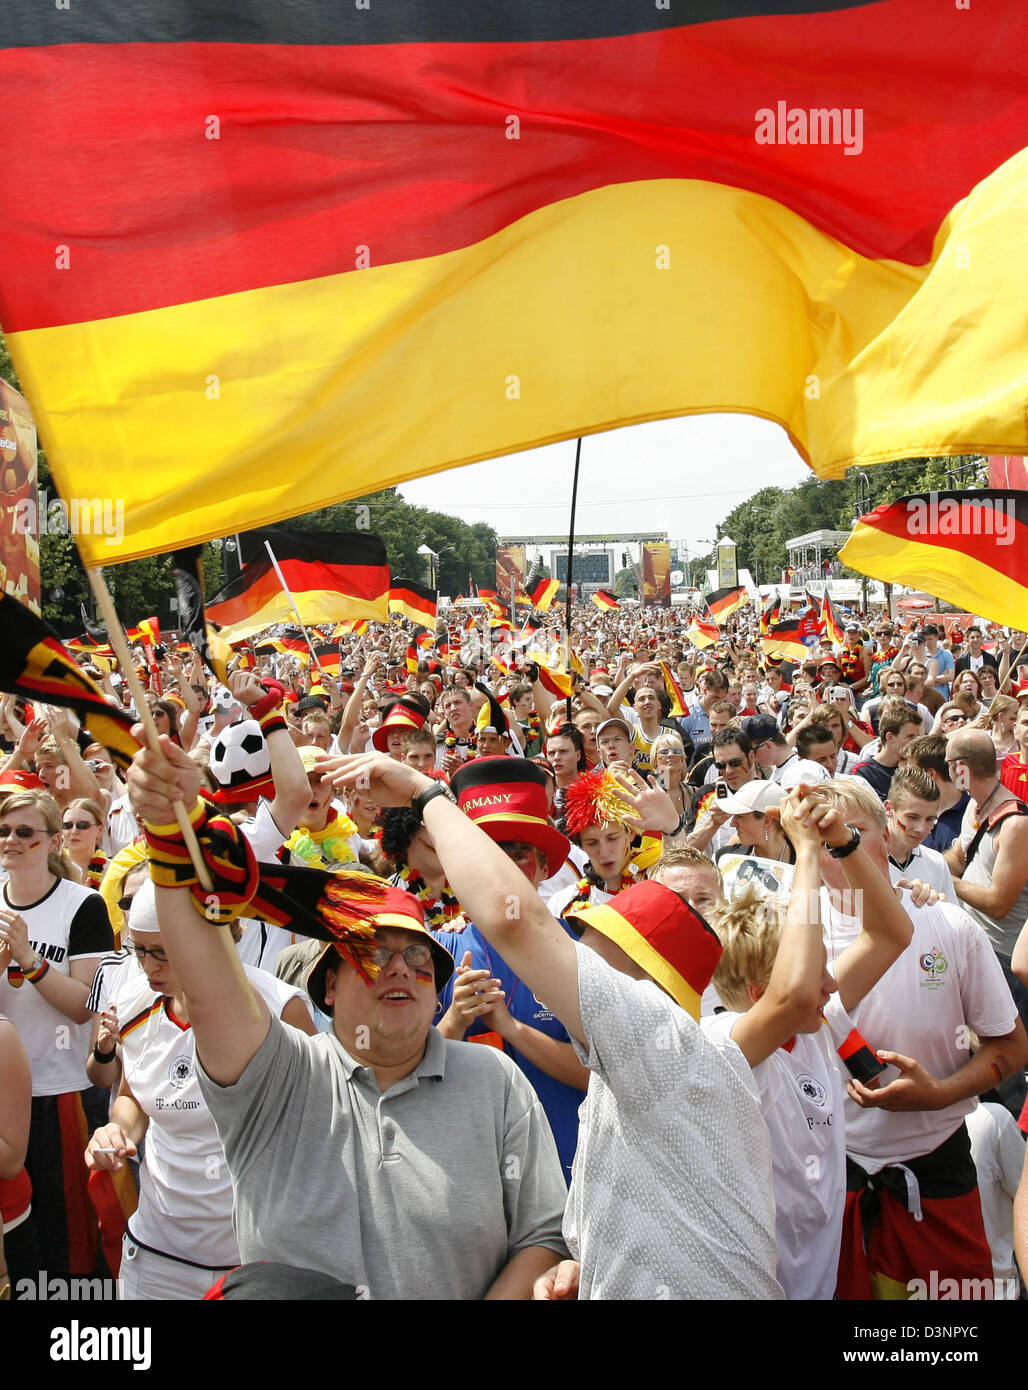 Supporters of the German national soccer team celebrate in the fan zone prior to the 2006 FIFA World Cup group A match of Ecuador vs Germany in Berlin, Germany, Tuesday 20 June 2006. DPA/MARCEL METTELSIEFEN  +++(c) dpa - Bildfunk+++ Stock Photo